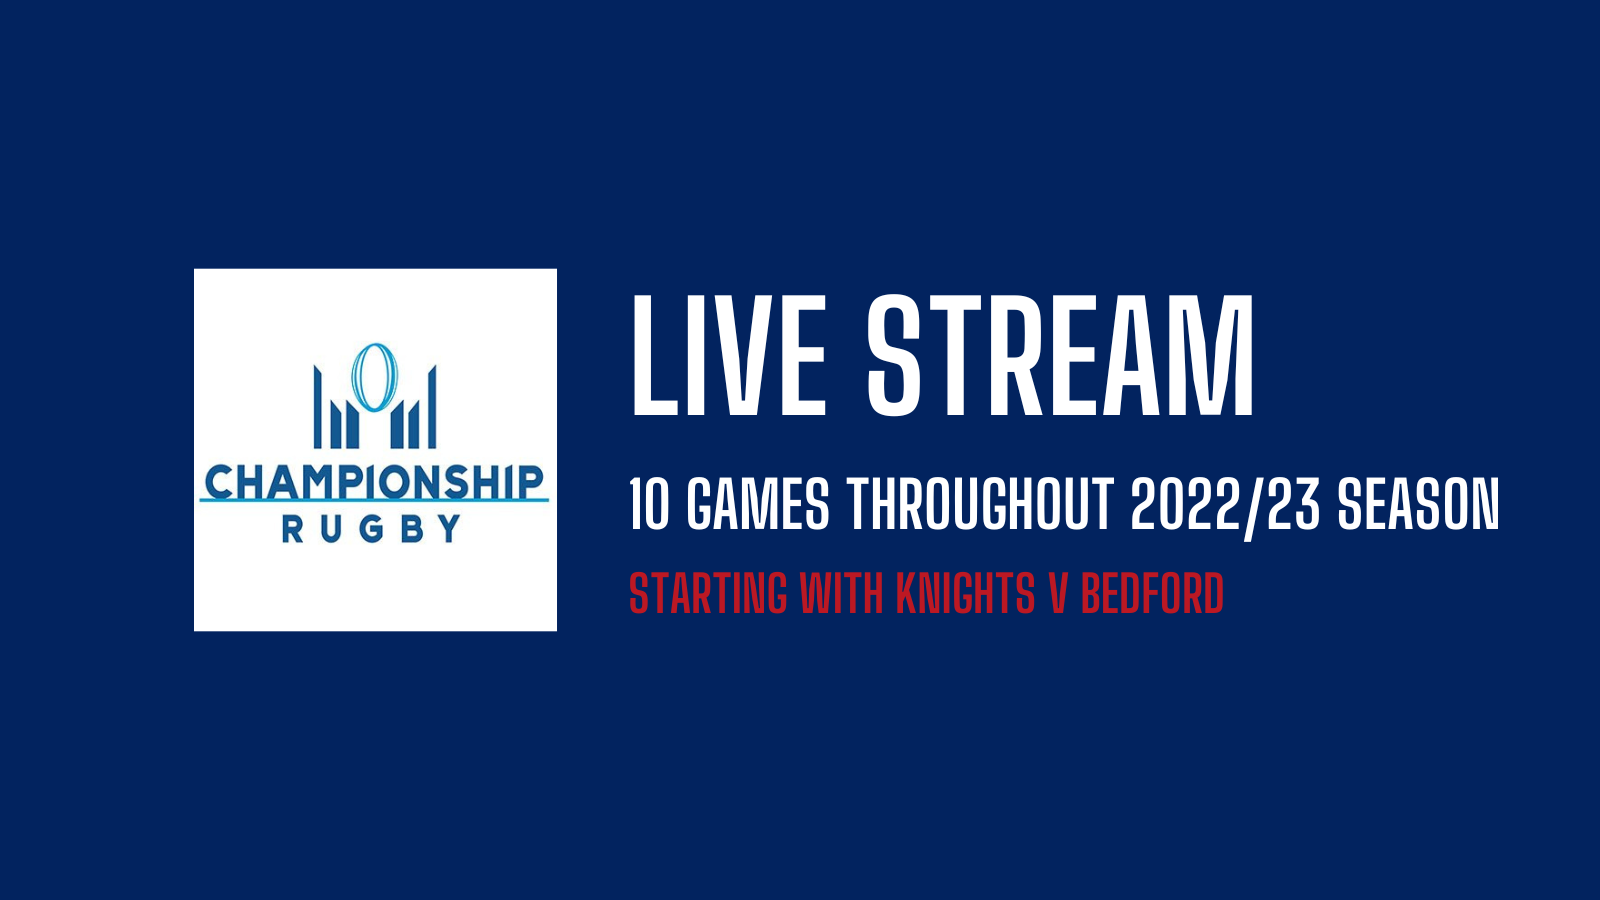 Championship Rugby to Live Stream Games